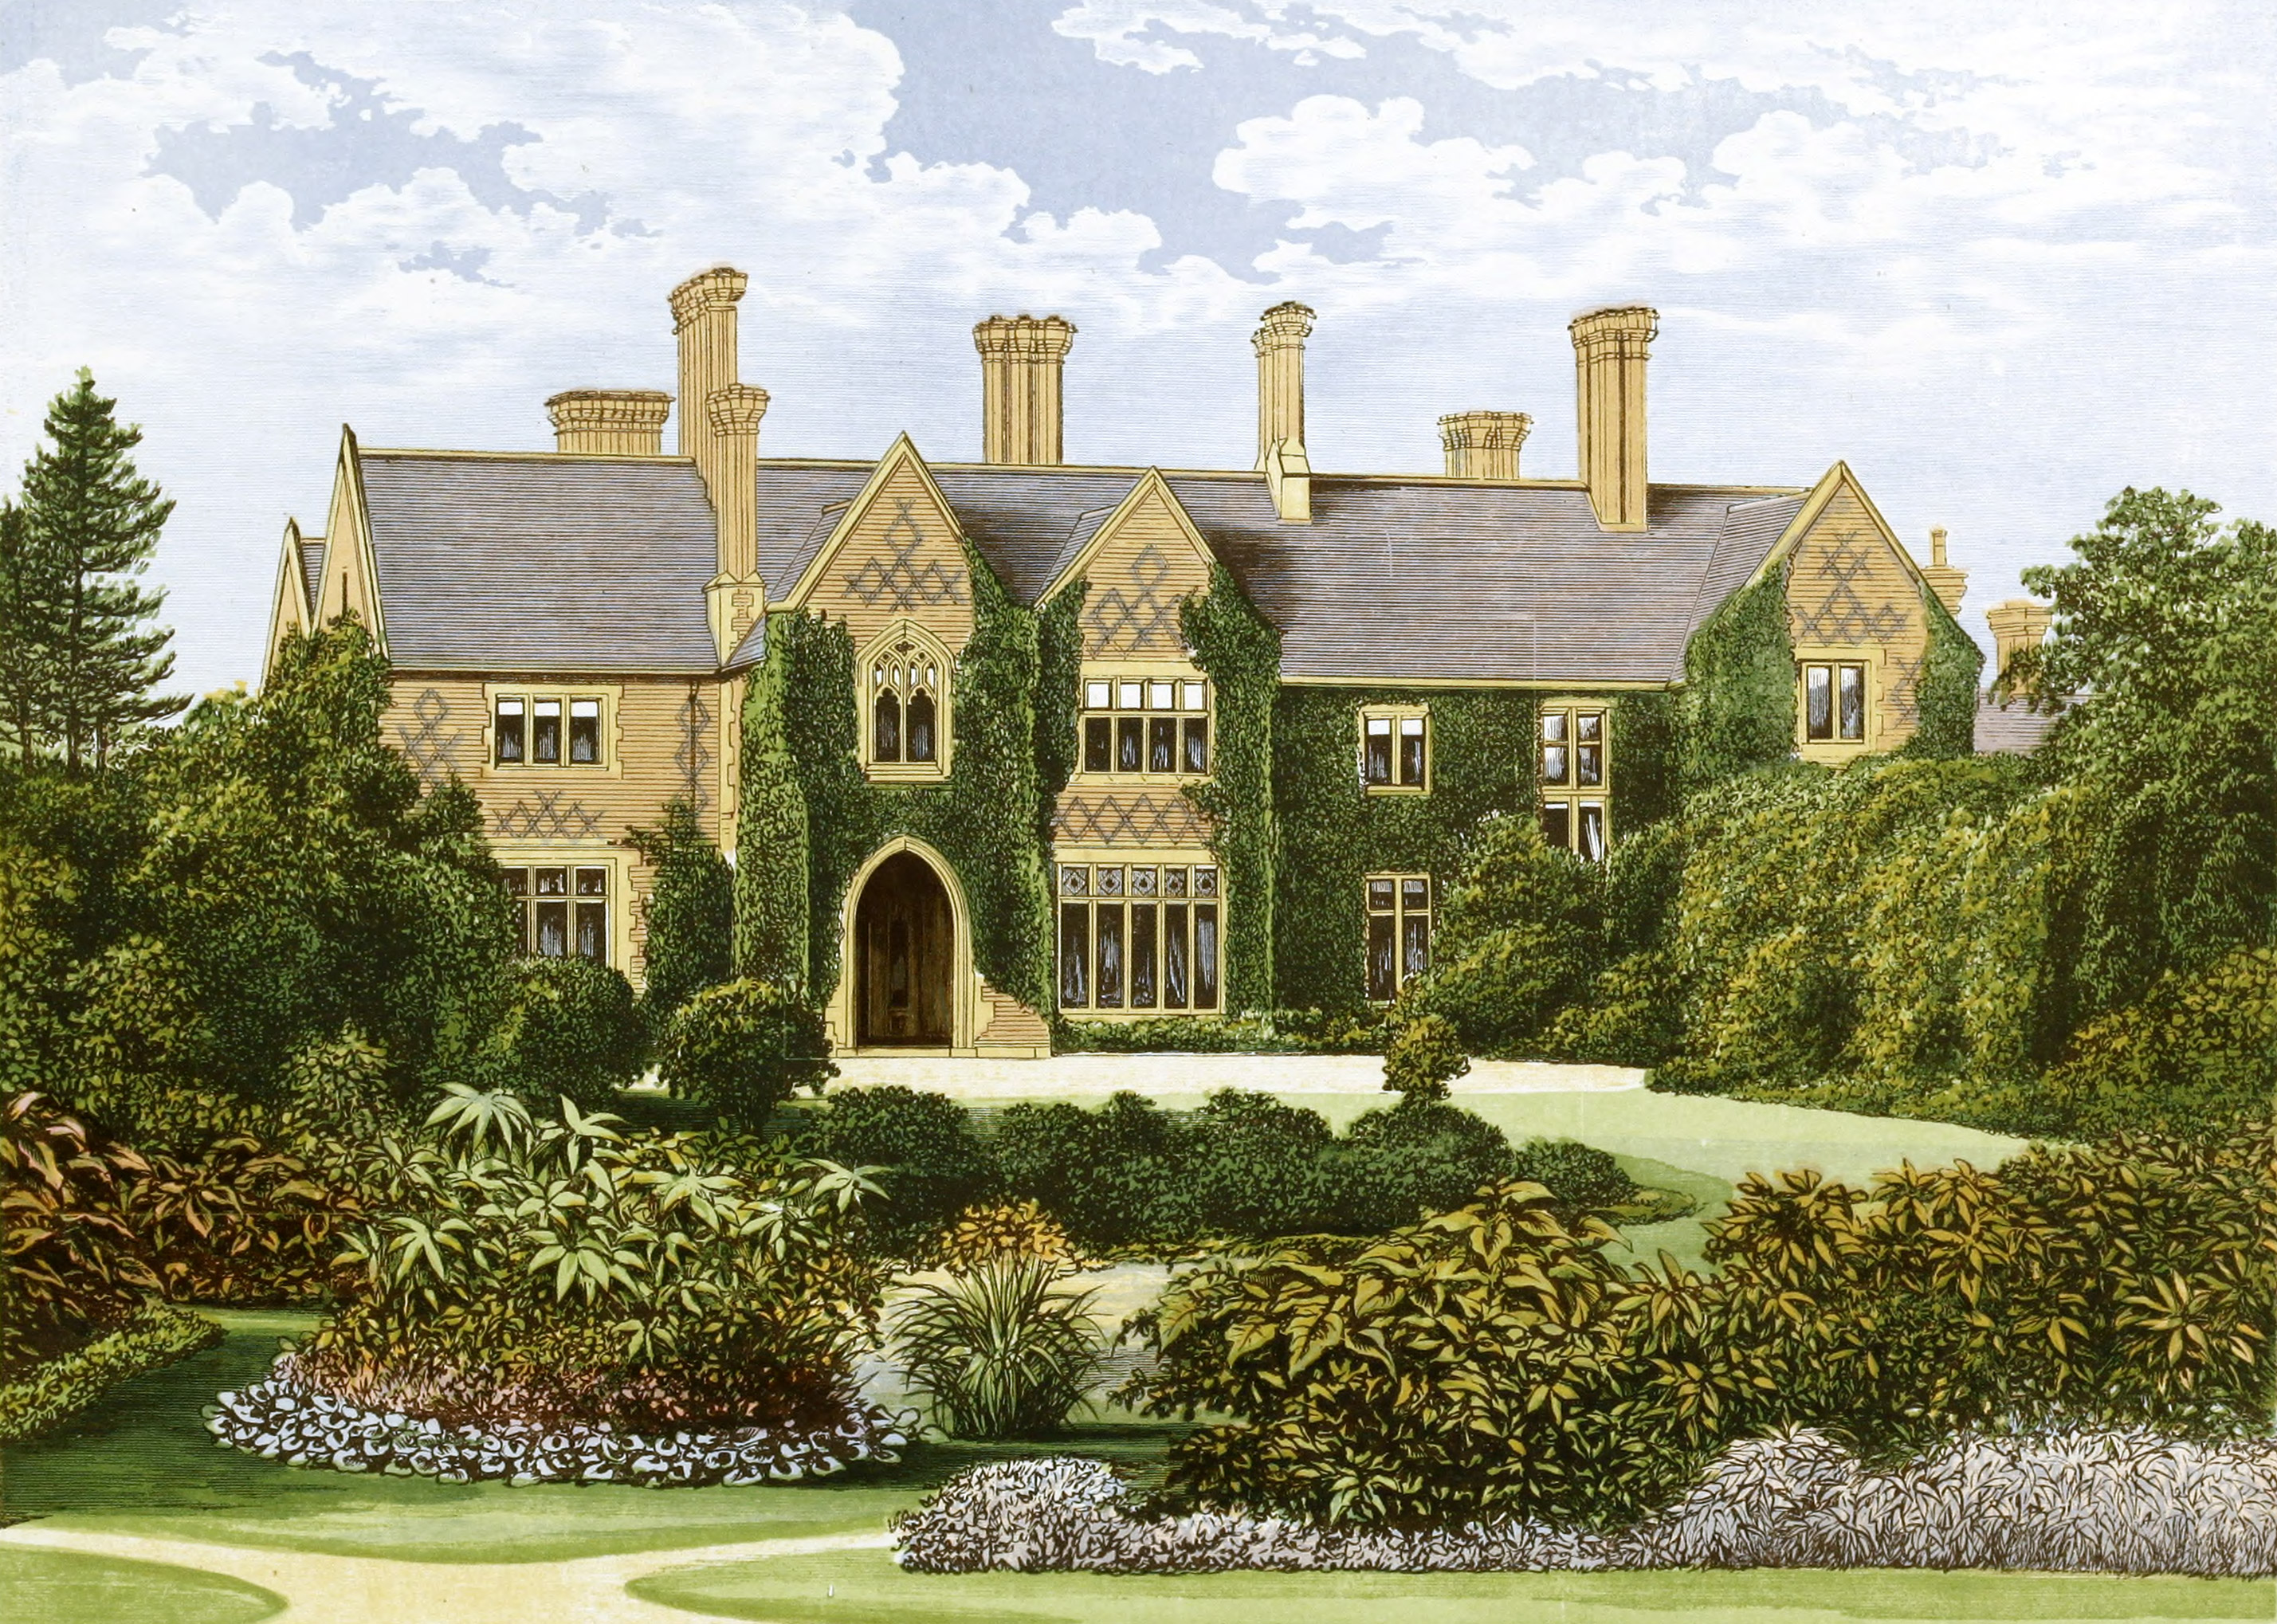 Oxley Manor